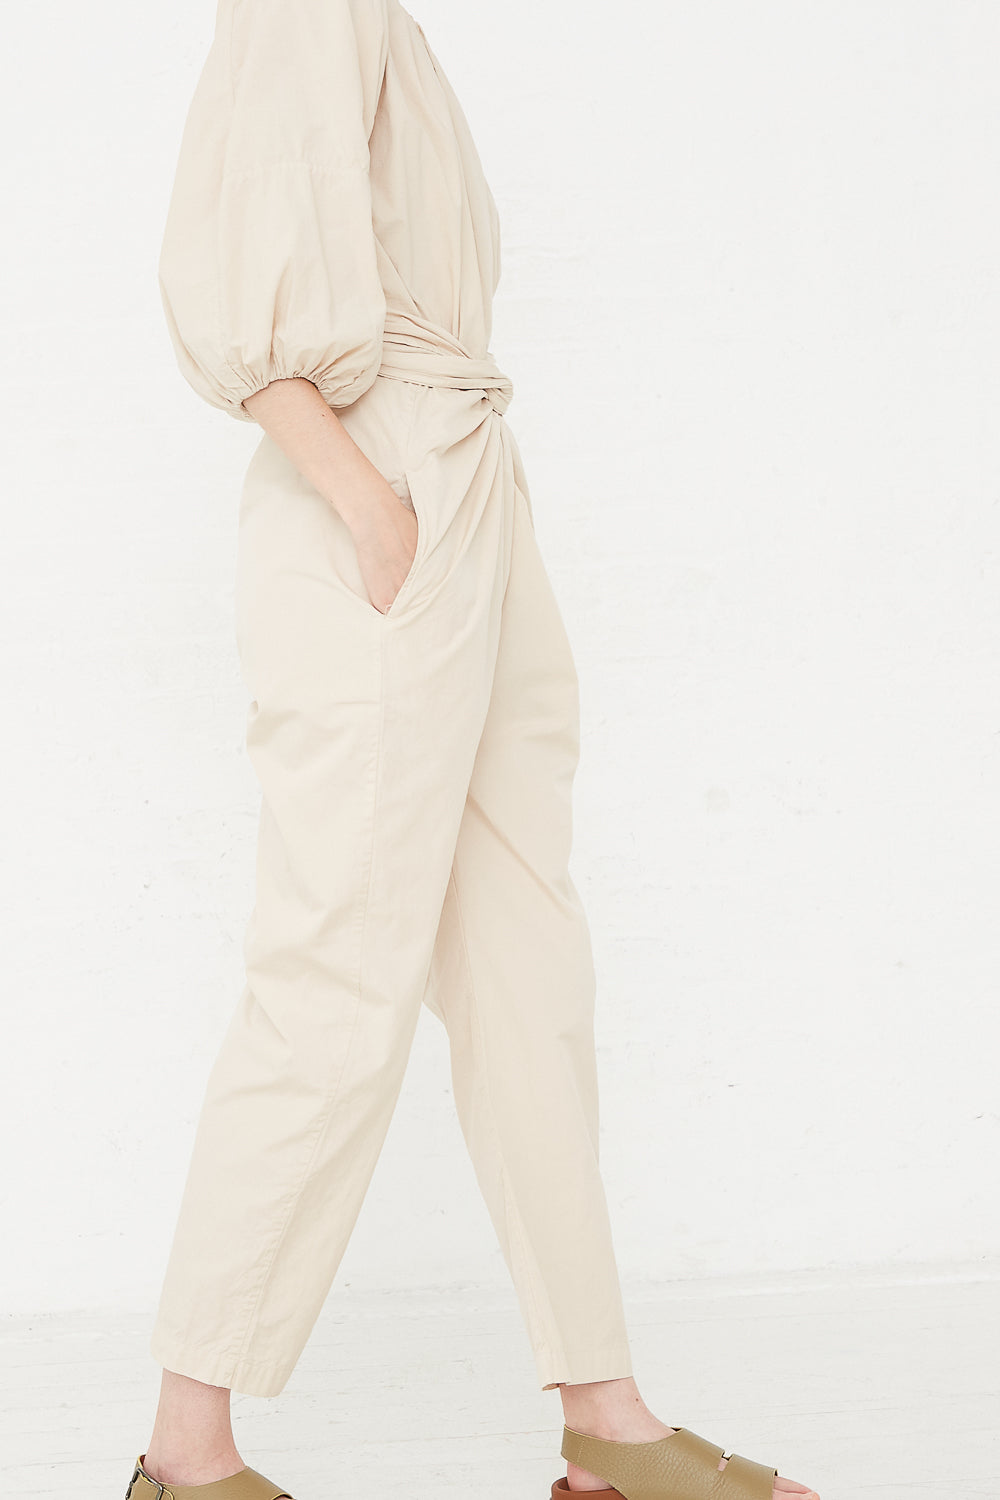 Cosmic Wonder - Suvin Cotton Broadcloth Wrap Pant in Beeswax side view